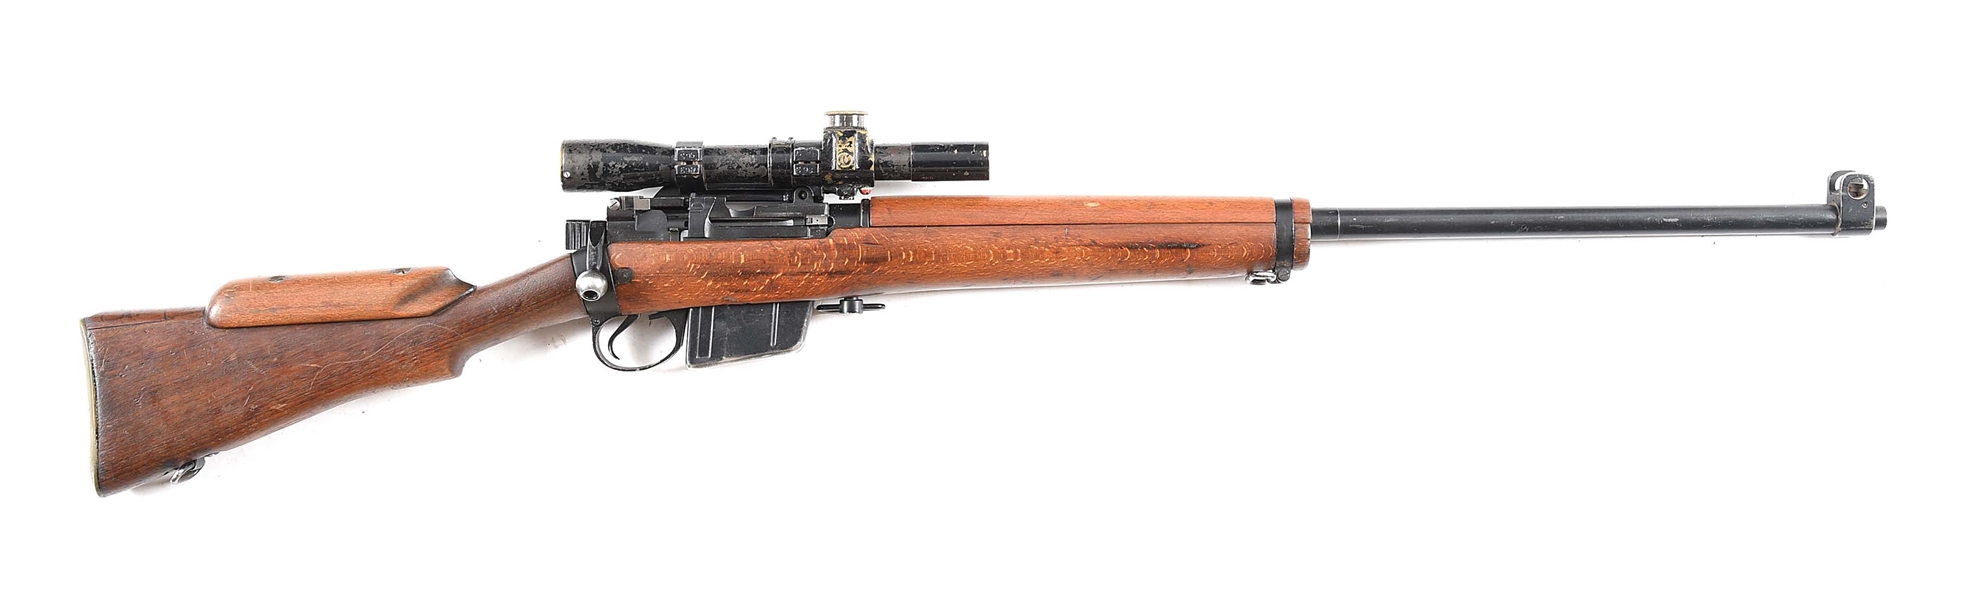 (C) BRITISH L42 A1 BOLT ACTION SNIPER RIFLE WITH SCOPE AND TRANSIT CHEST.